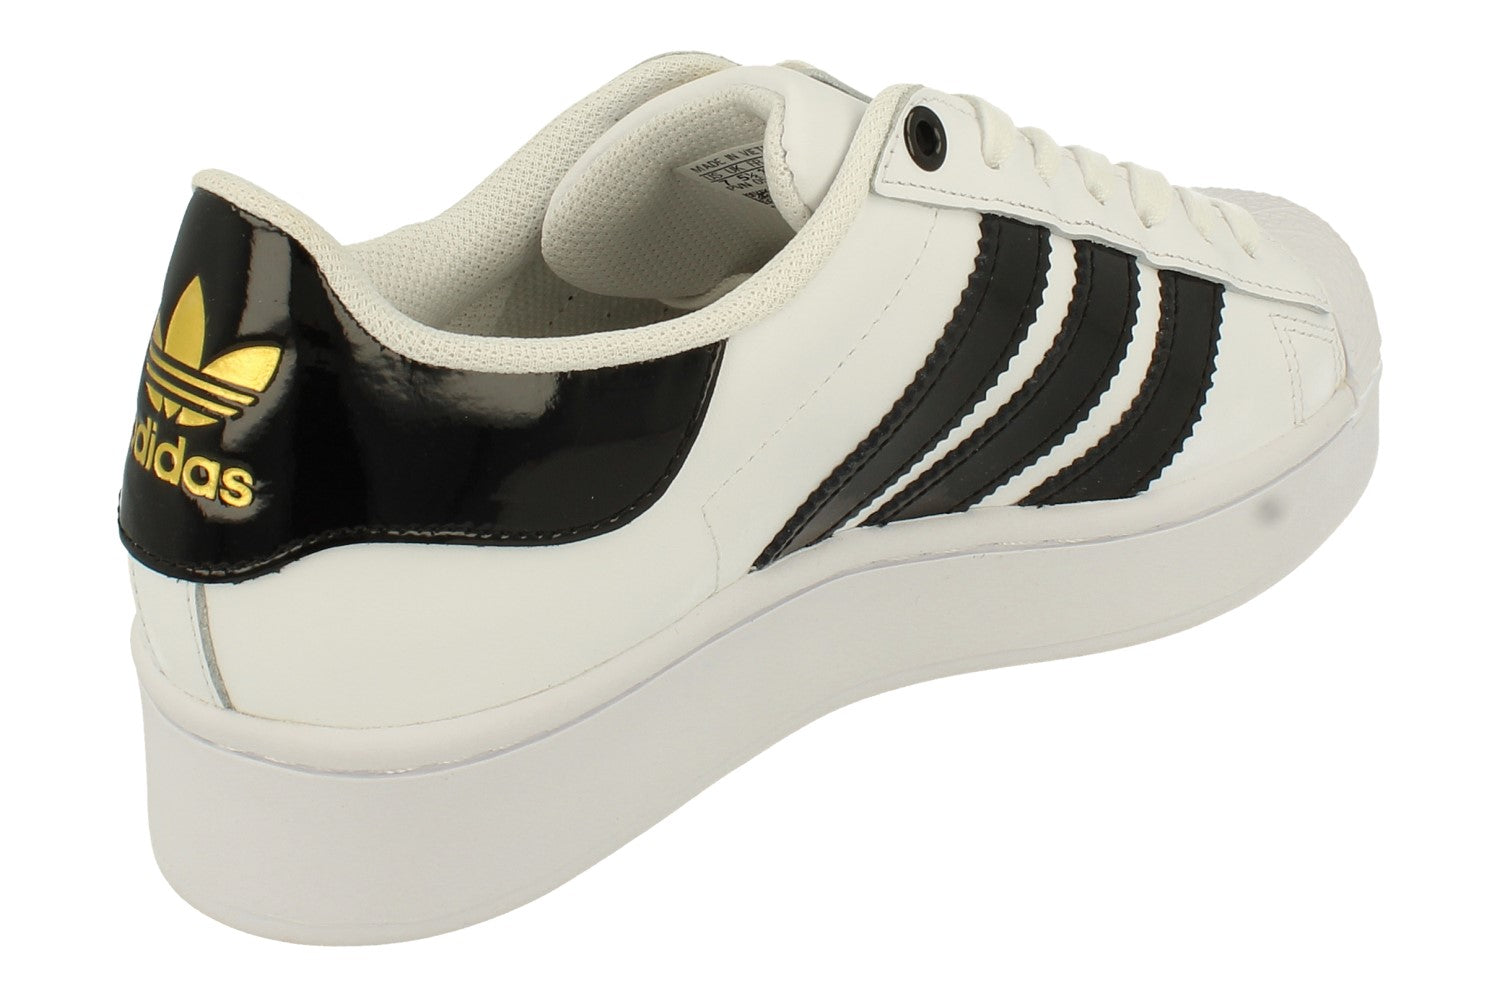 Adidas Superstar Bold Womens Leather Trainers - UK 4 6 7 - Black/White -  FV3336